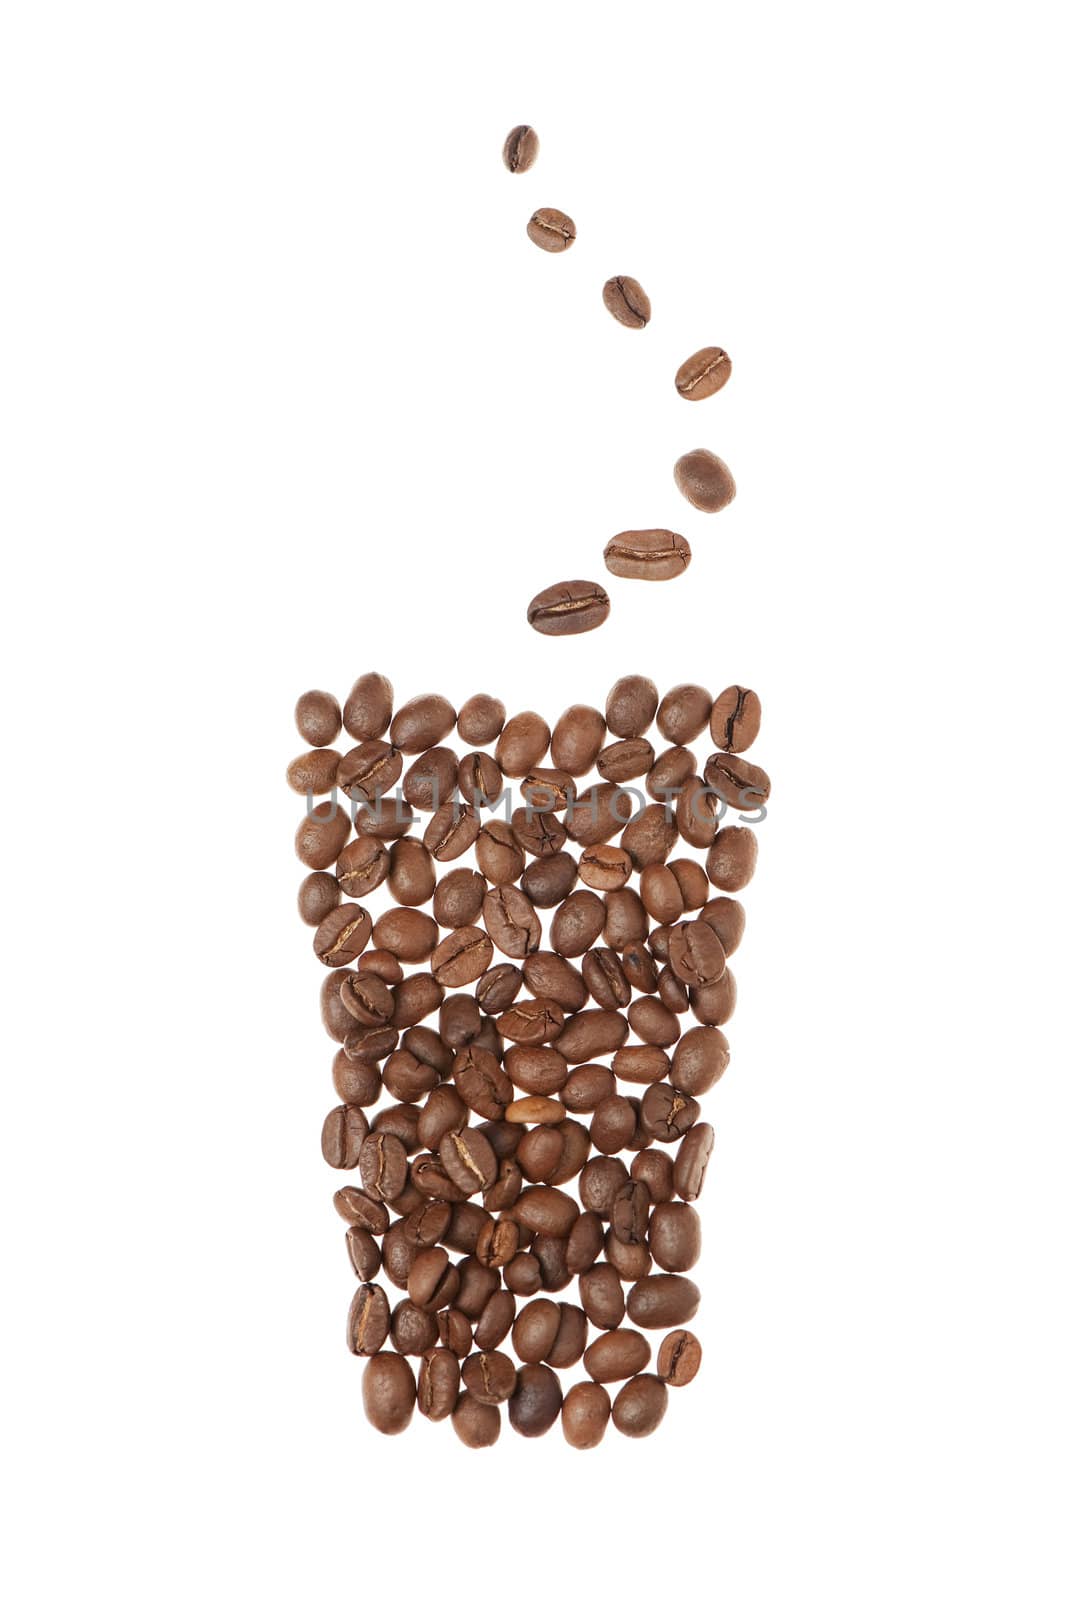 Cup from grains of coffee. It is isolated on a white background